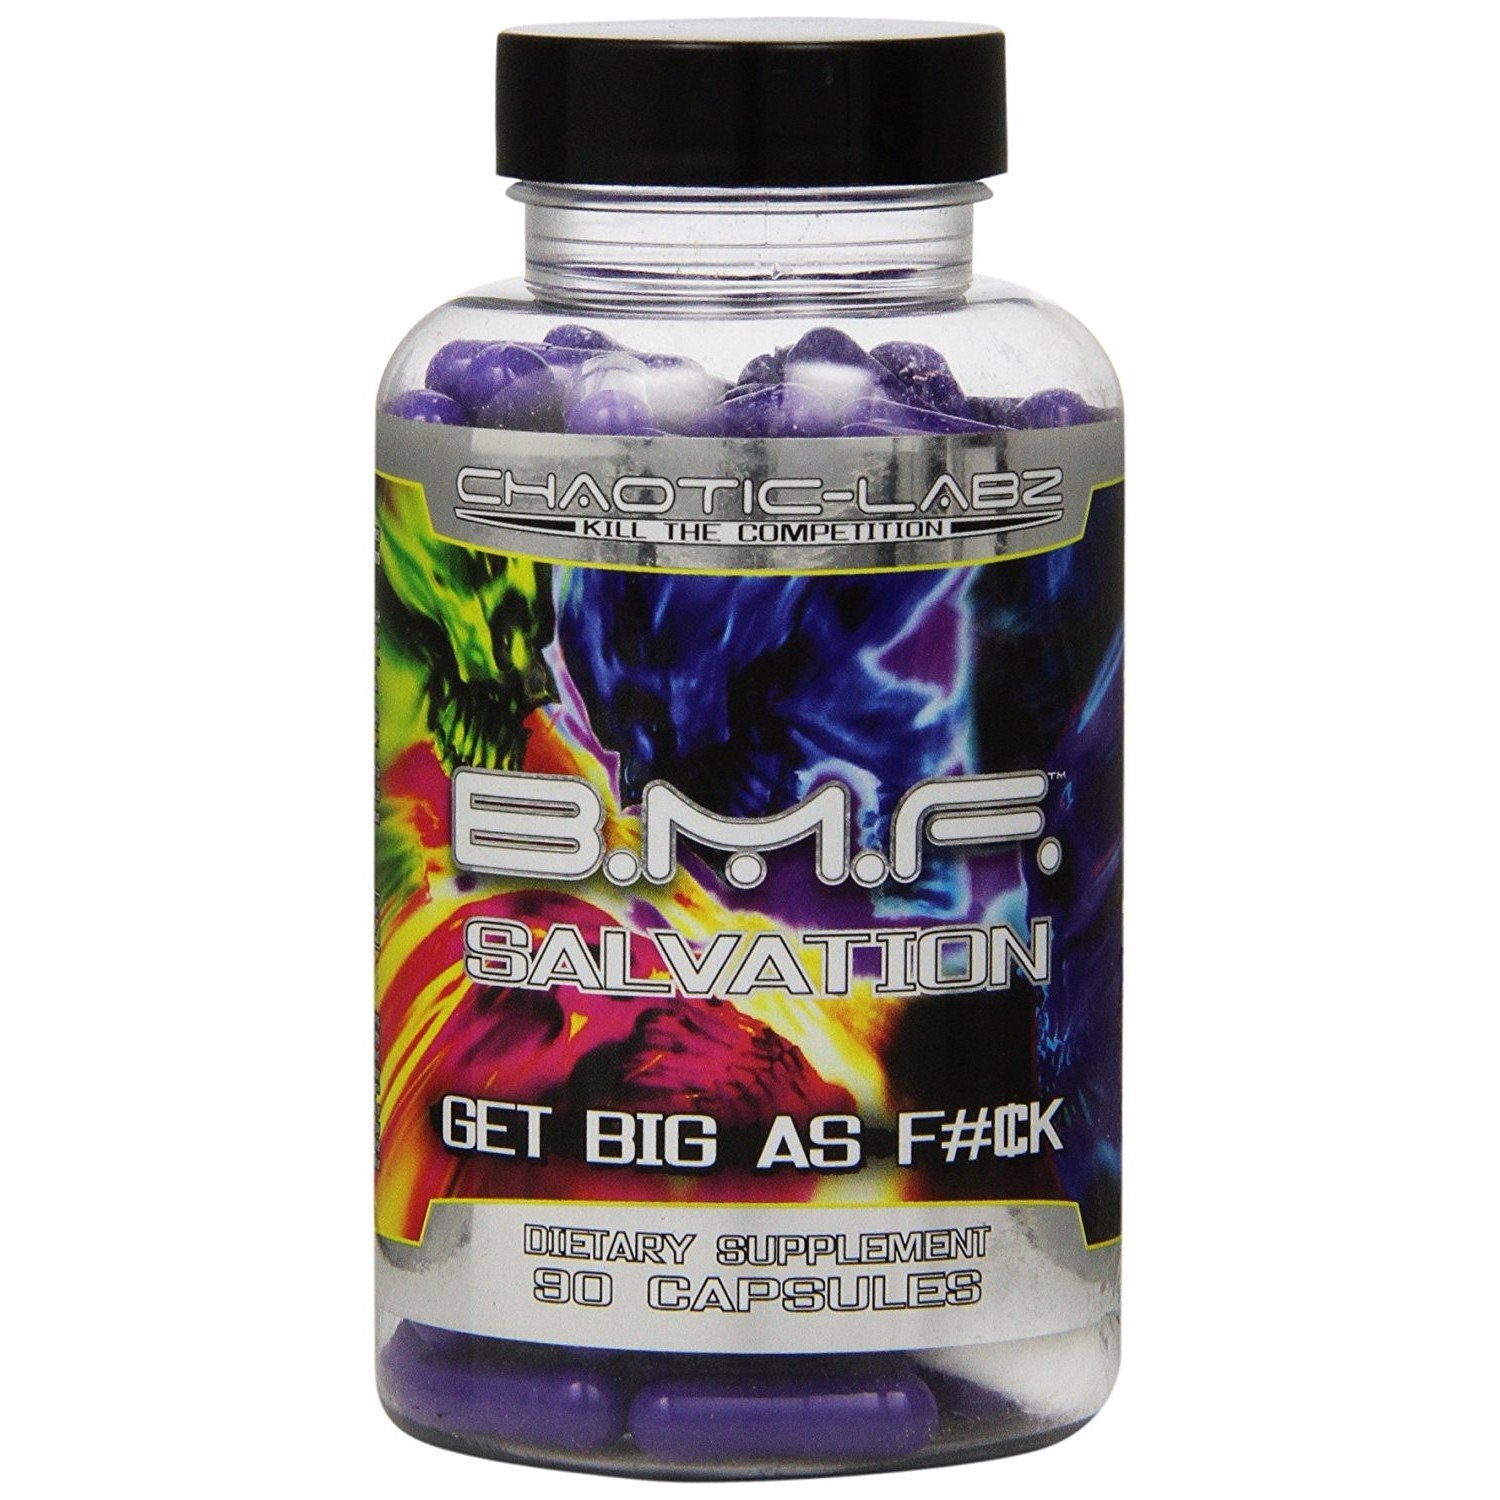 BMF Salvation, 60 pcs, Chaotic Labz. Special supplements. 